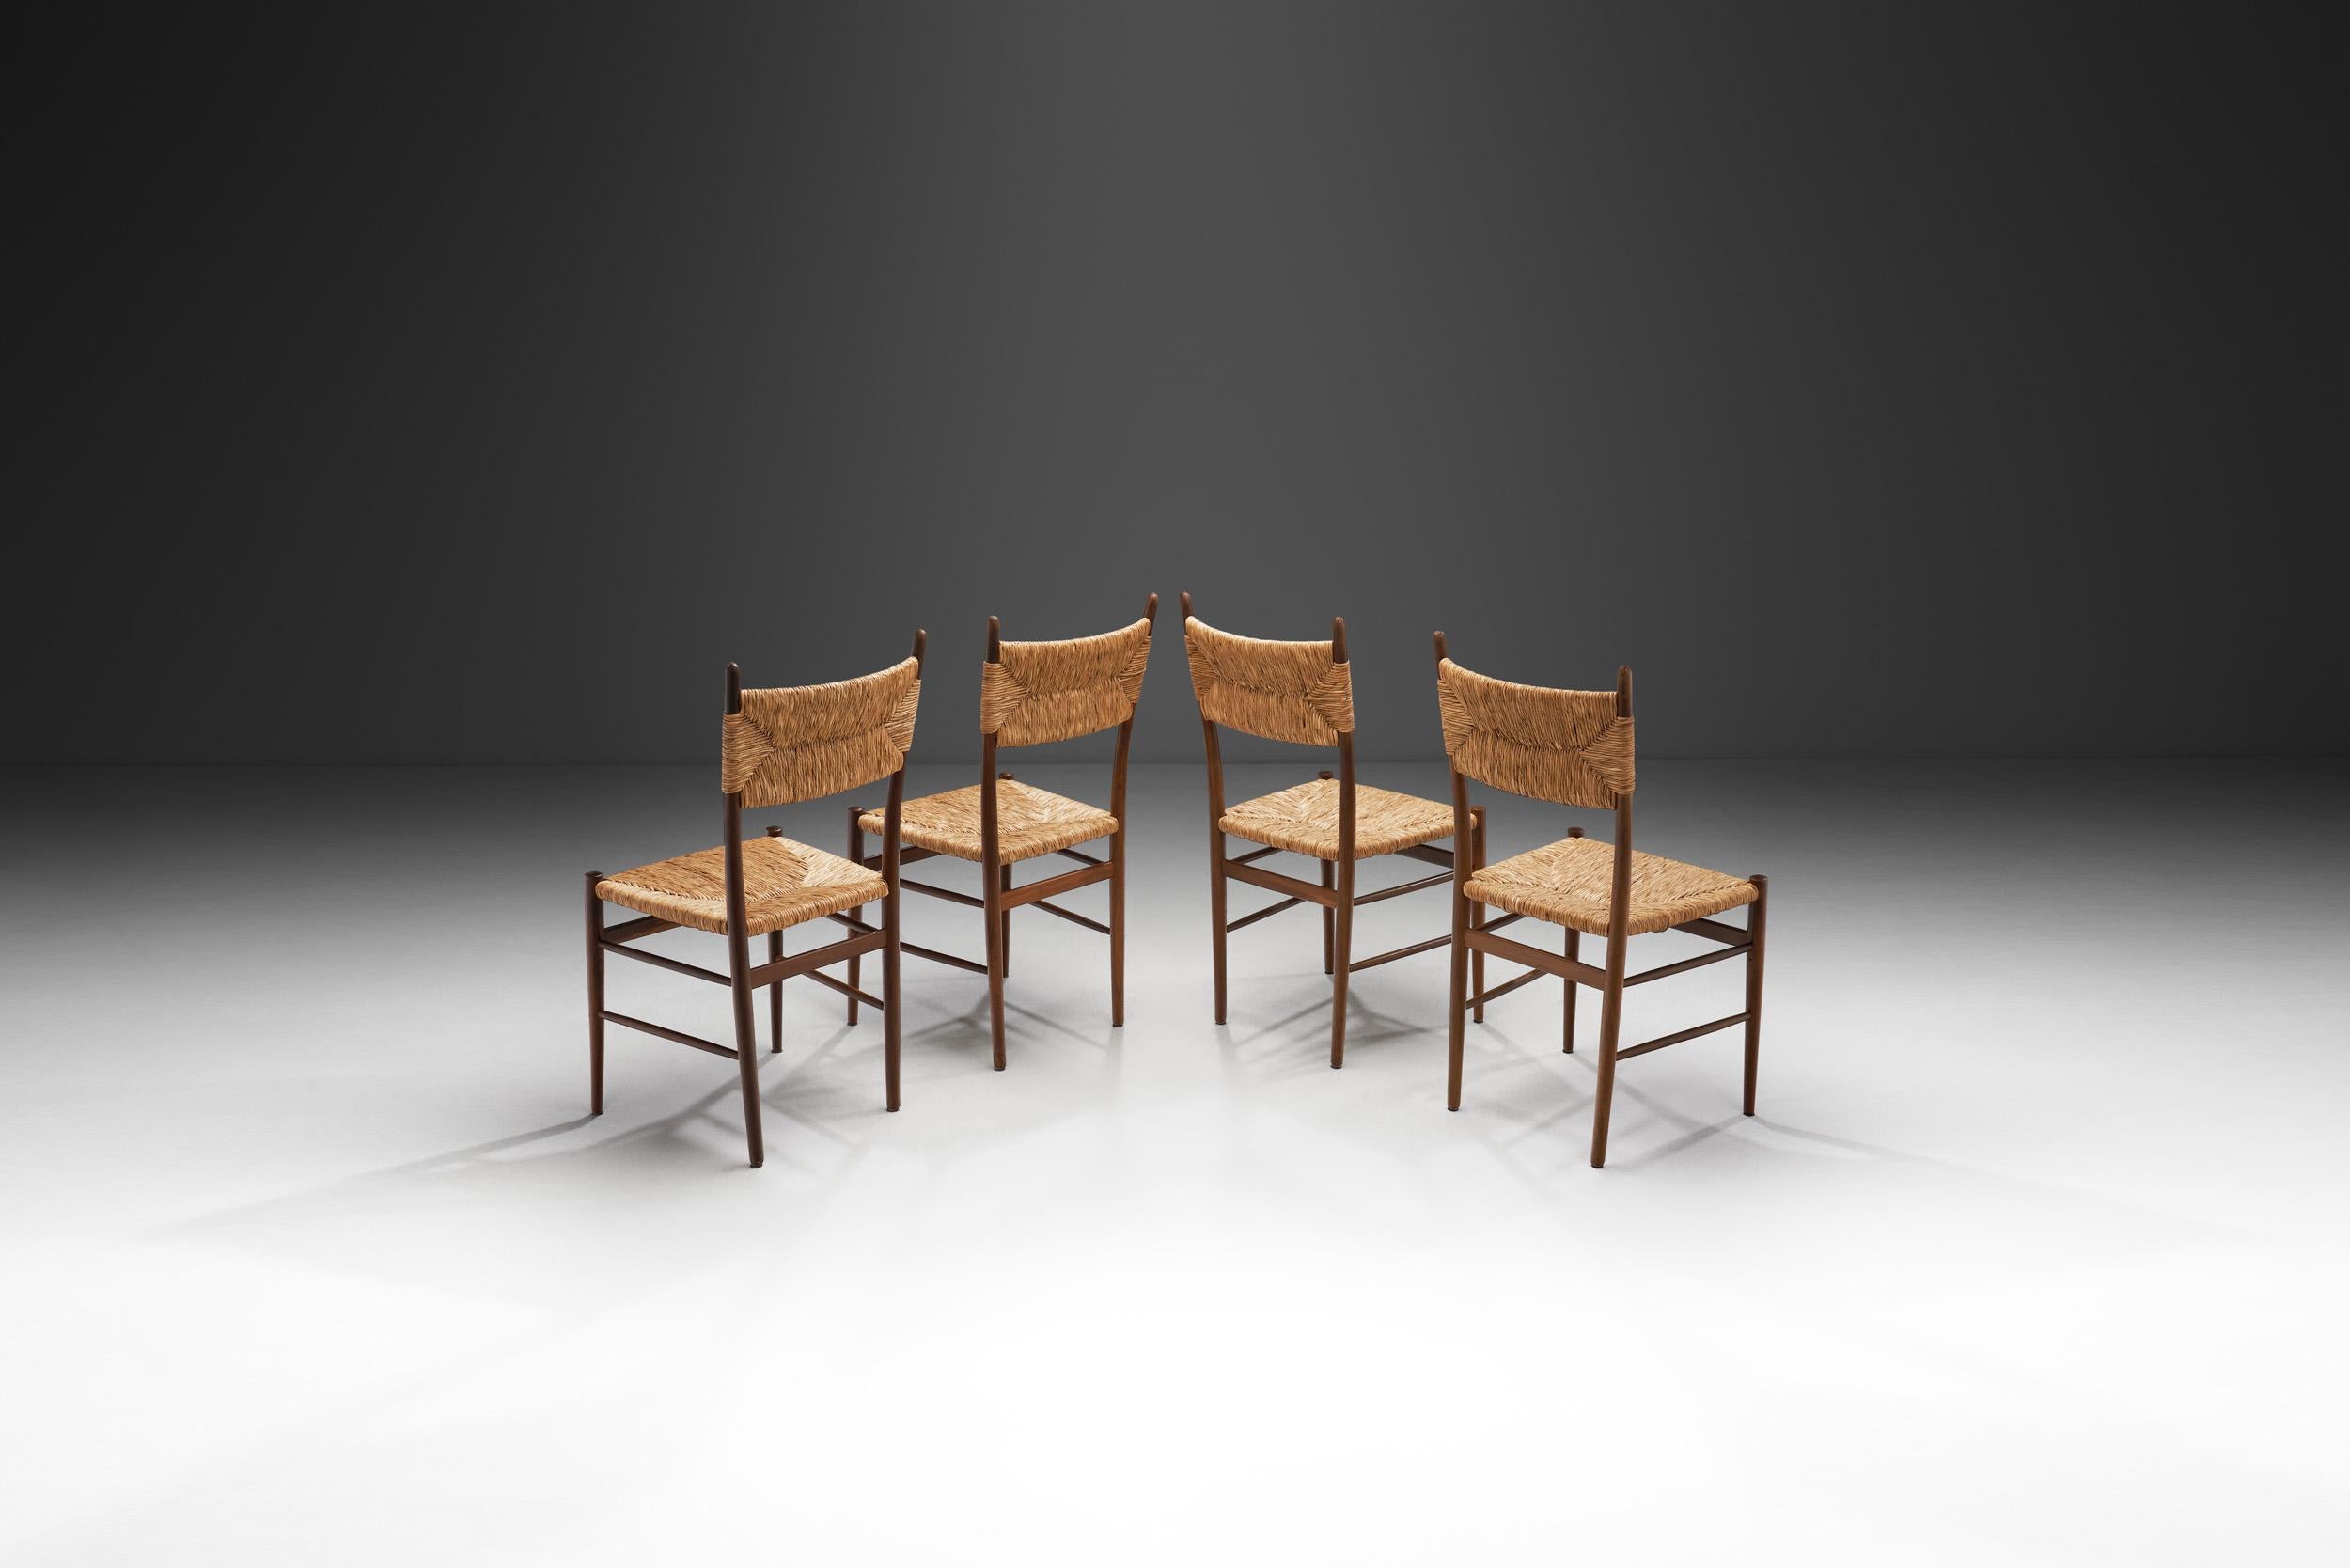 European A Set of Four Dining Chairs with Woven Straw Seats and Backs, Europe ca 1950s